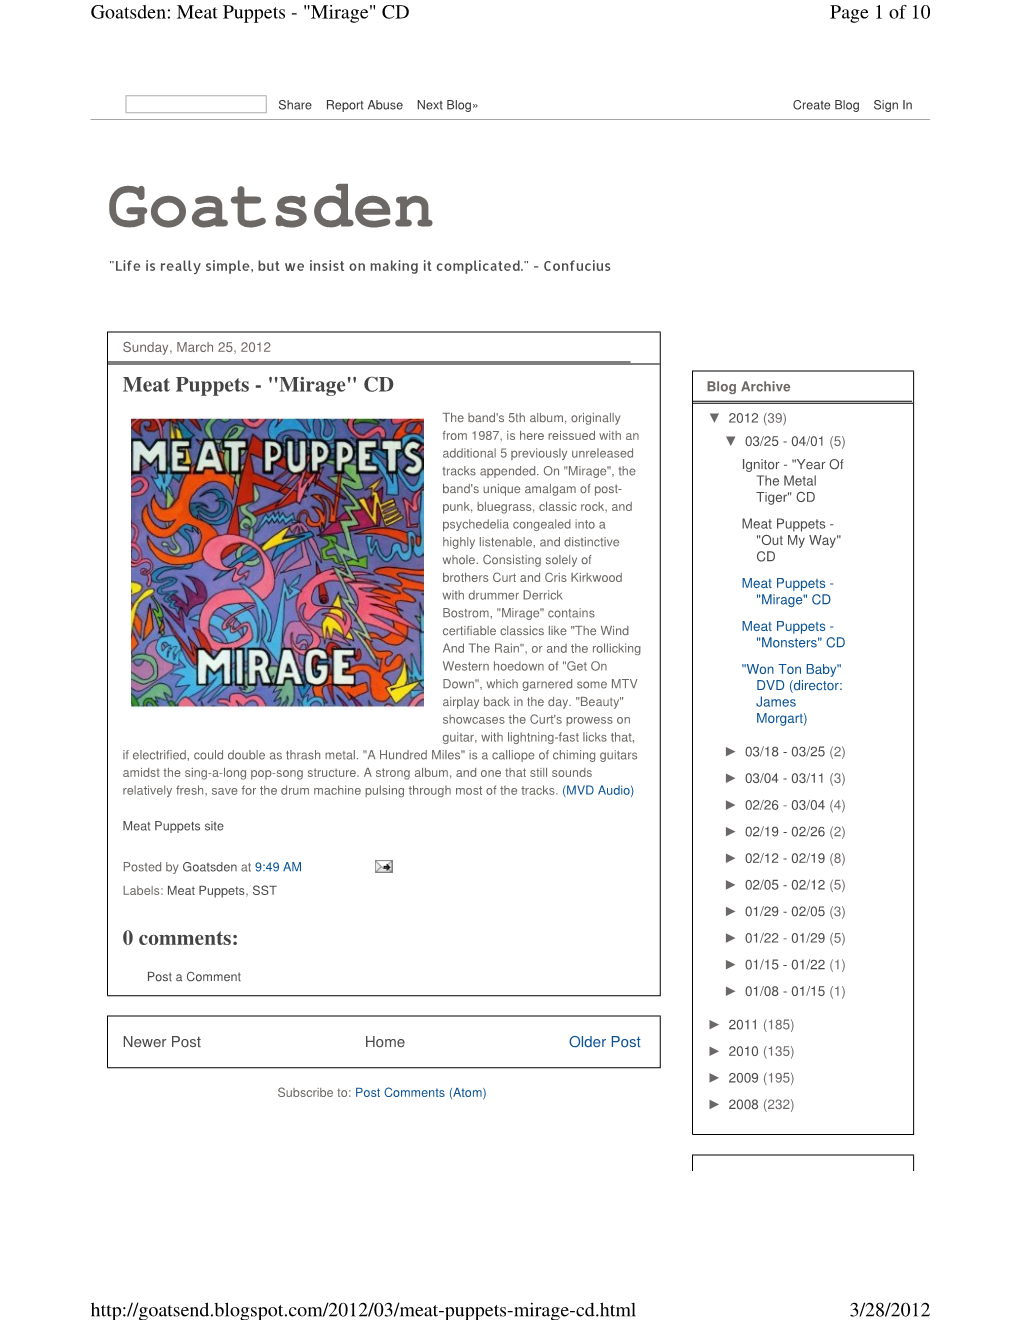 Goatsden: Meat Puppets - "Mirage" CD Page 1 of 10